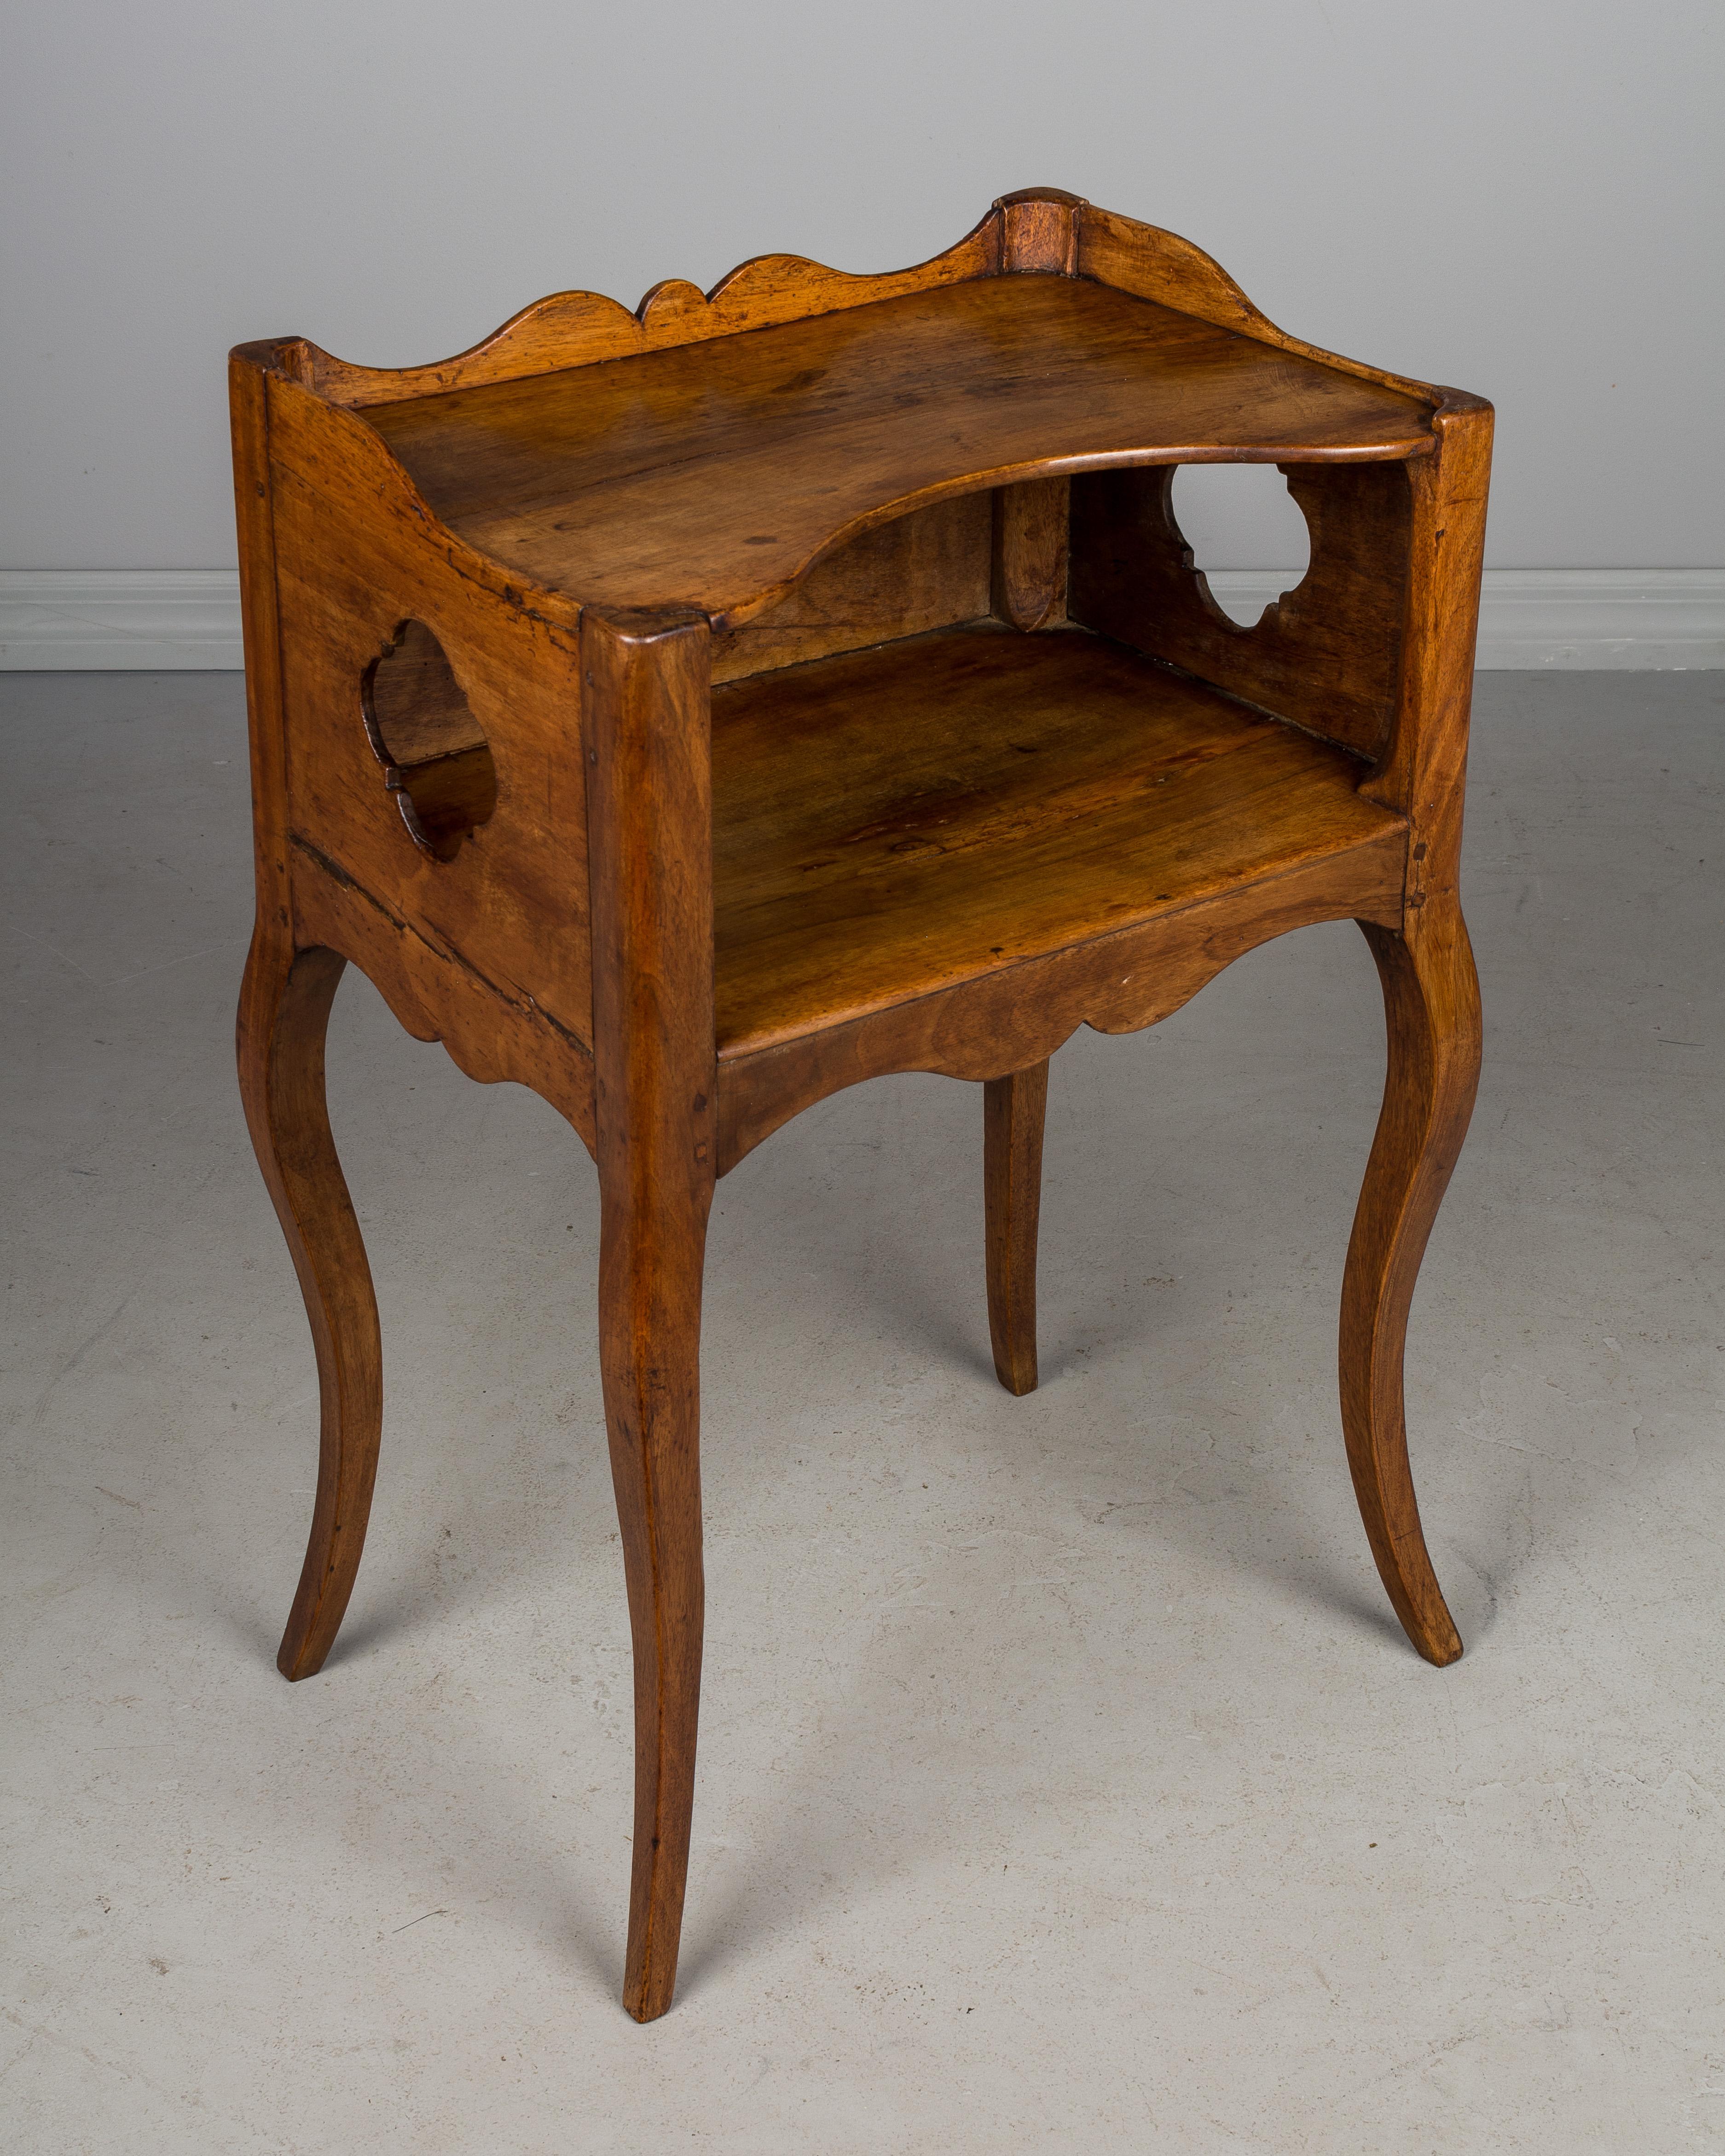 A late 18th century Louis XV country French side table or nightstand made of solid walnut, with a pierced quatrefoil shape cut-out on the sides and on the back. Scalloped apron and gallery surrounding the upper shelf. Slender curved legs. A sturdy,